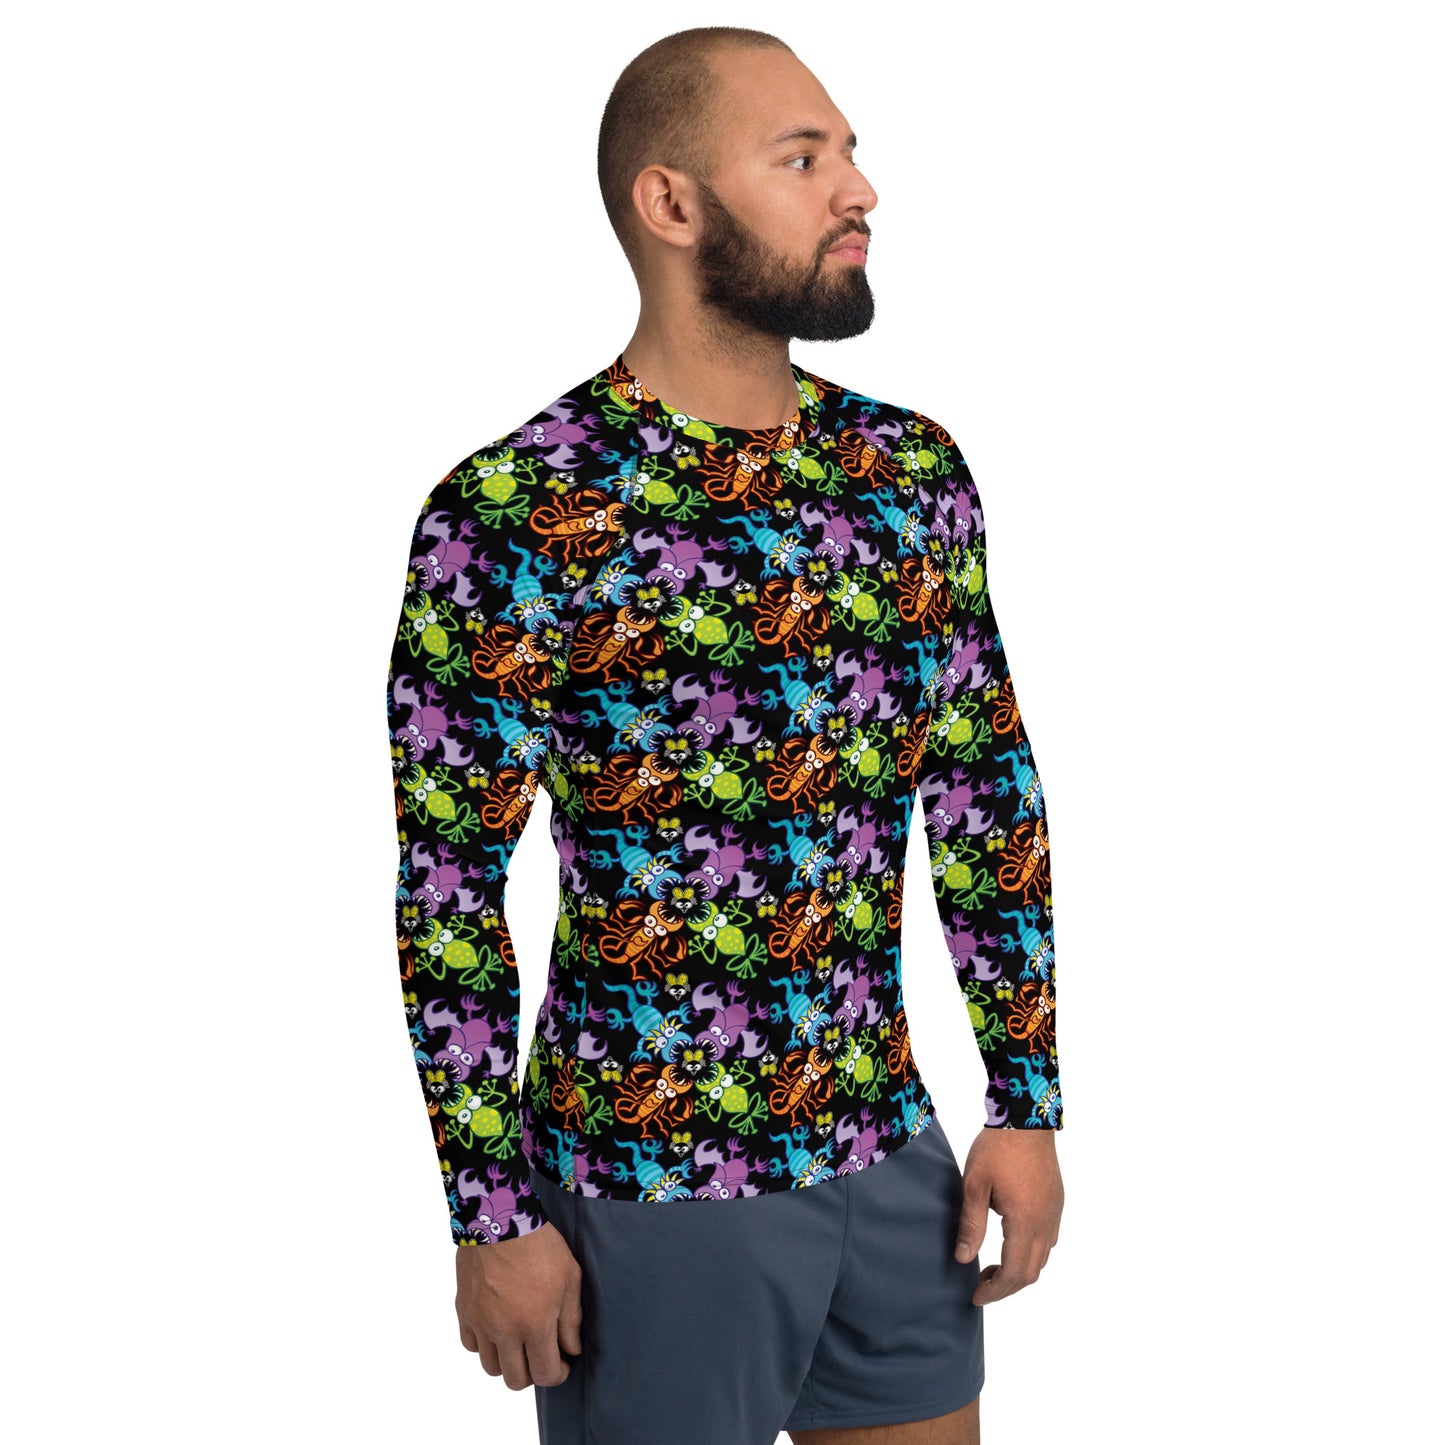 Athletic man wearing Men's Rash Guard All over printed with Bat, scorpion, lizard and frog fighting over an unlucky fly